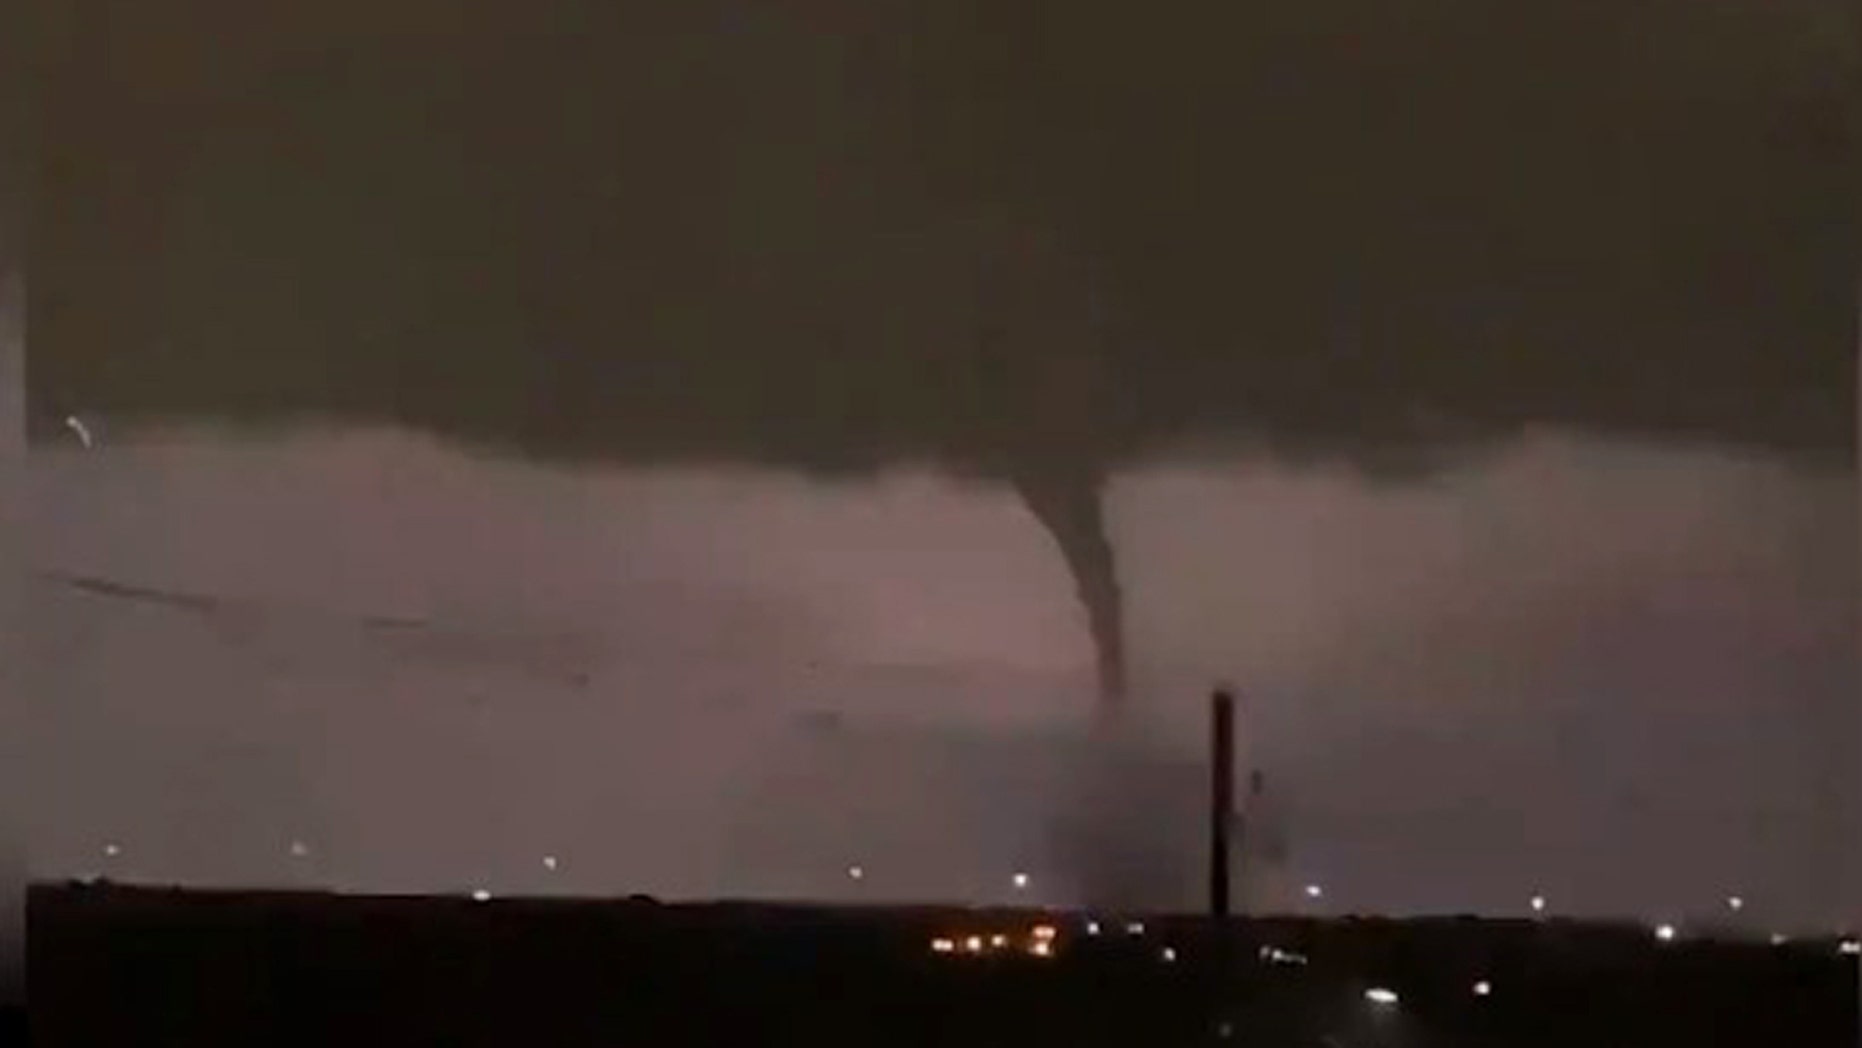 Video footage uploaded to Twitter shows tornado ripping through Dallas, Texas. (Photo: Twitter/@weatherdak)